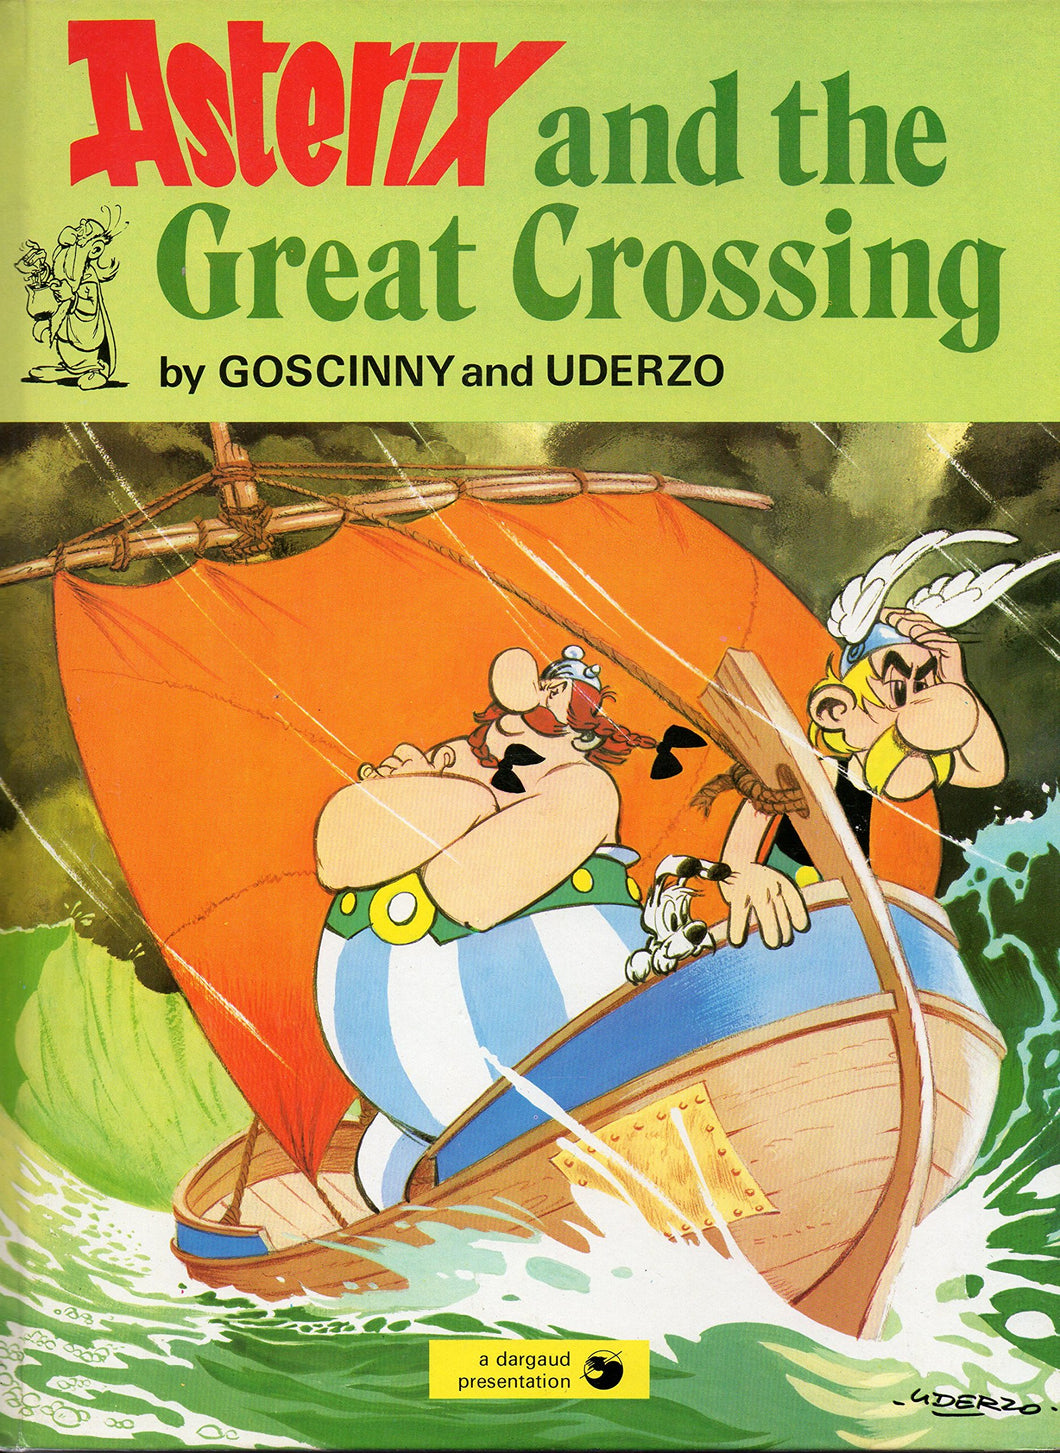 Asterix and the great crossing [Hardcover] Goscinny & Uderzo: